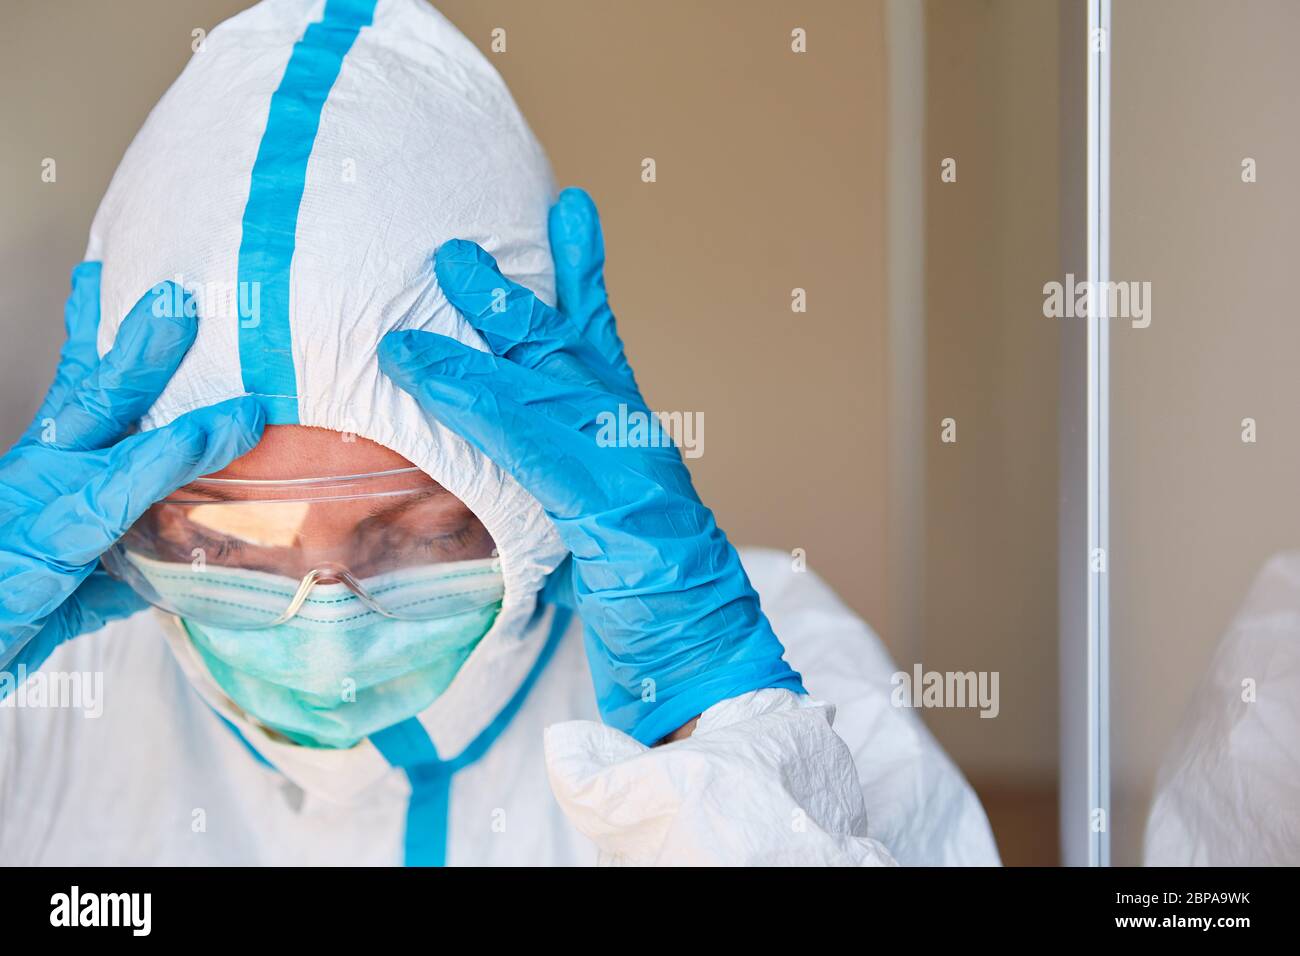 Doctor in protective clothing holds head due to exhaustion or burnout during coronavirus pandemic Stock Photo